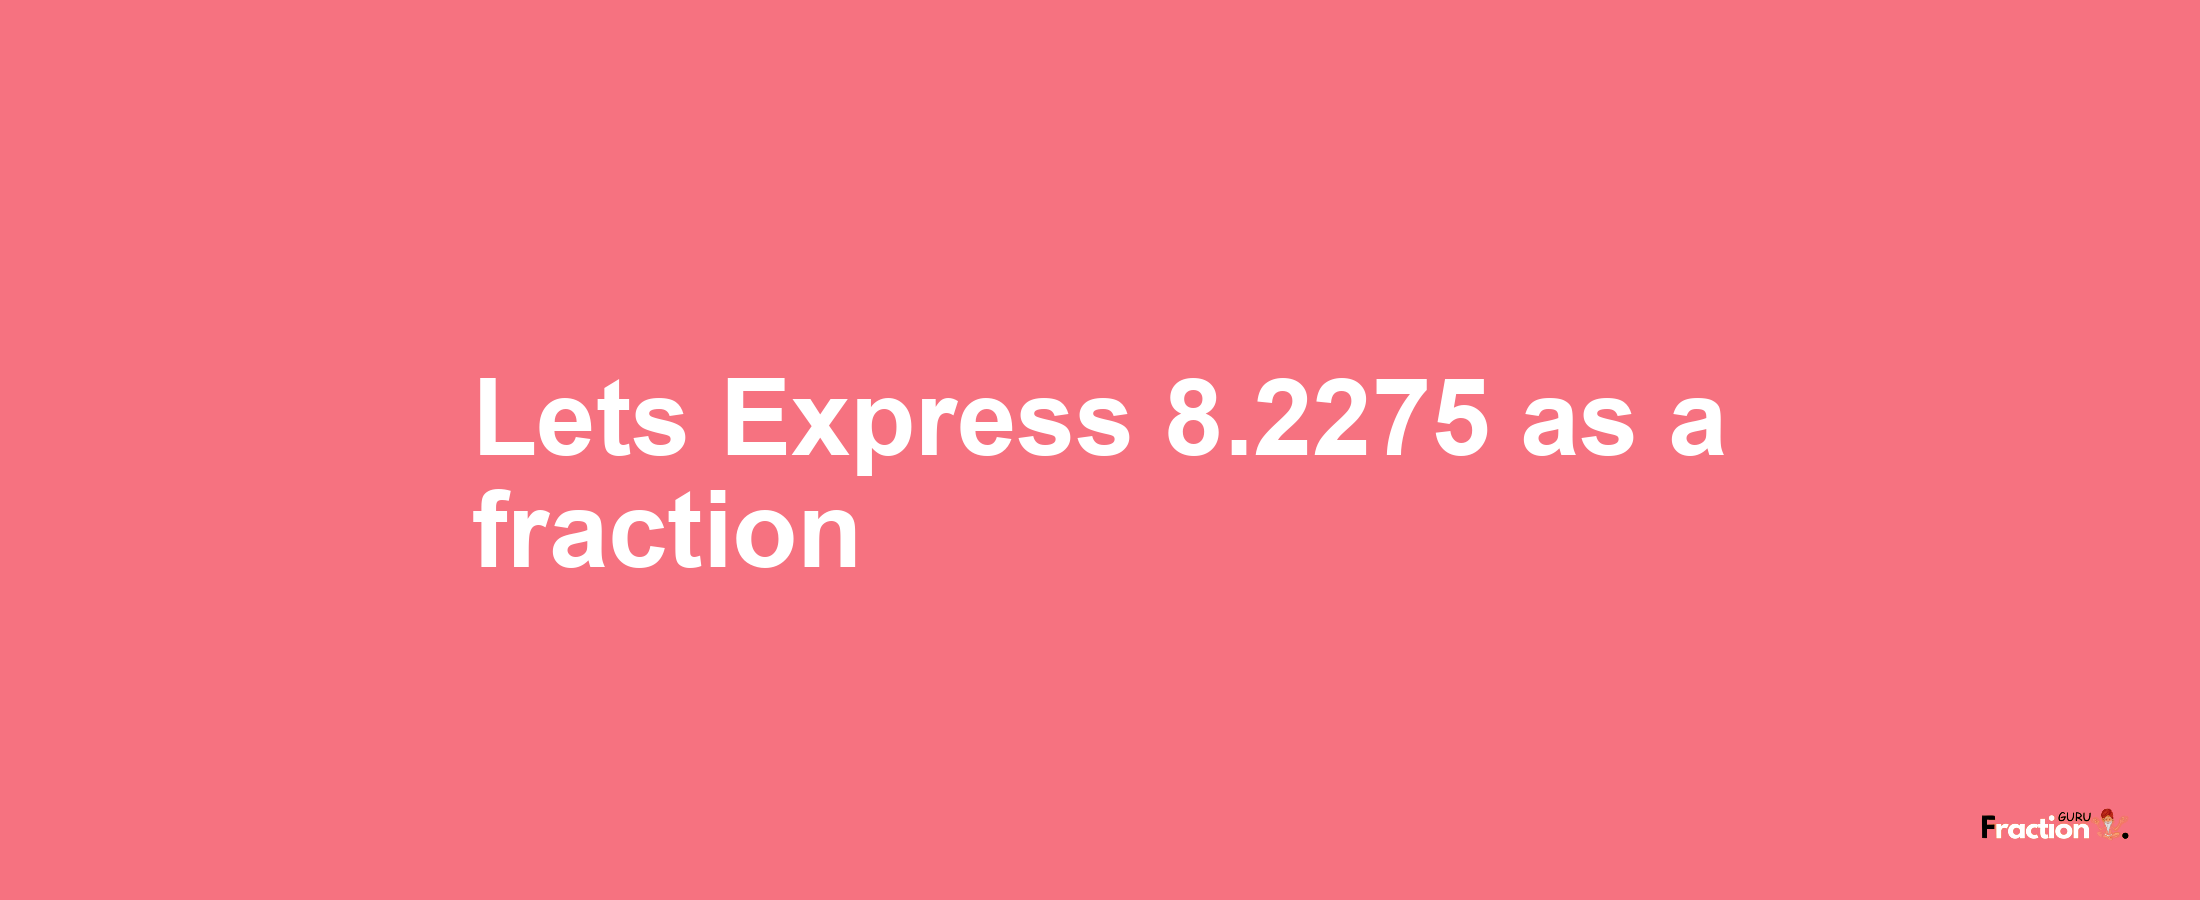 Lets Express 8.2275 as afraction